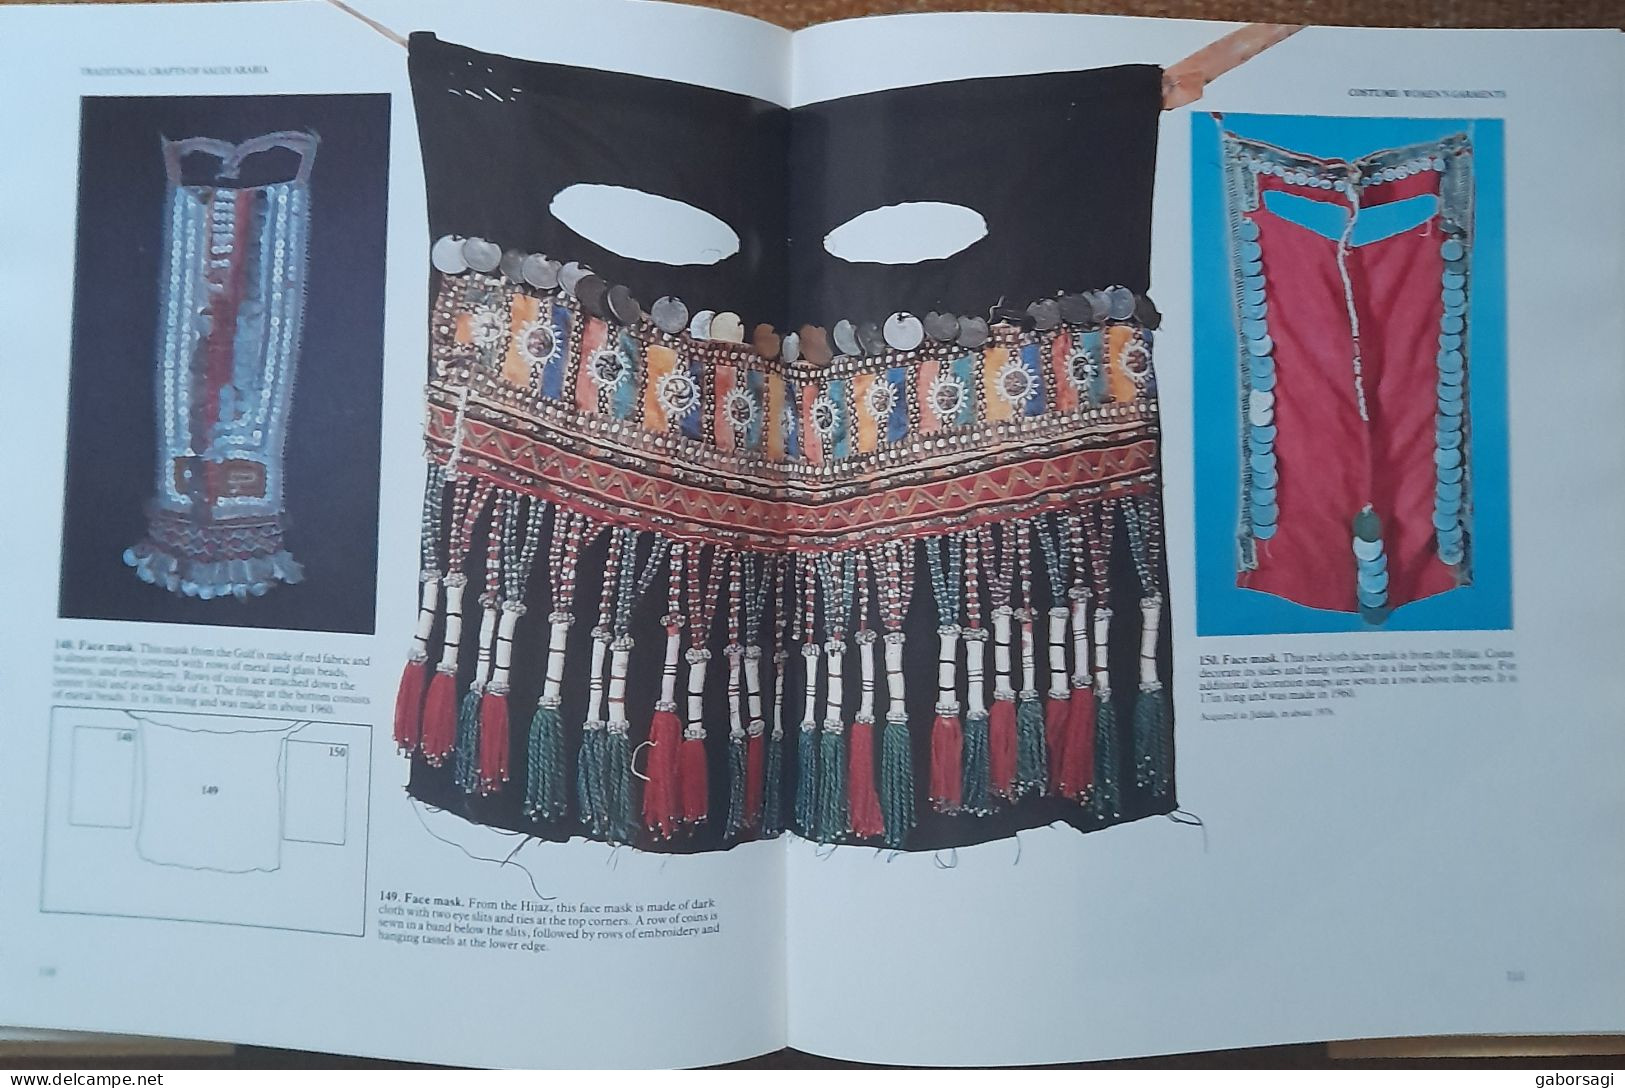 Traditional Crafts of Saudi Arabia - John Topham and others